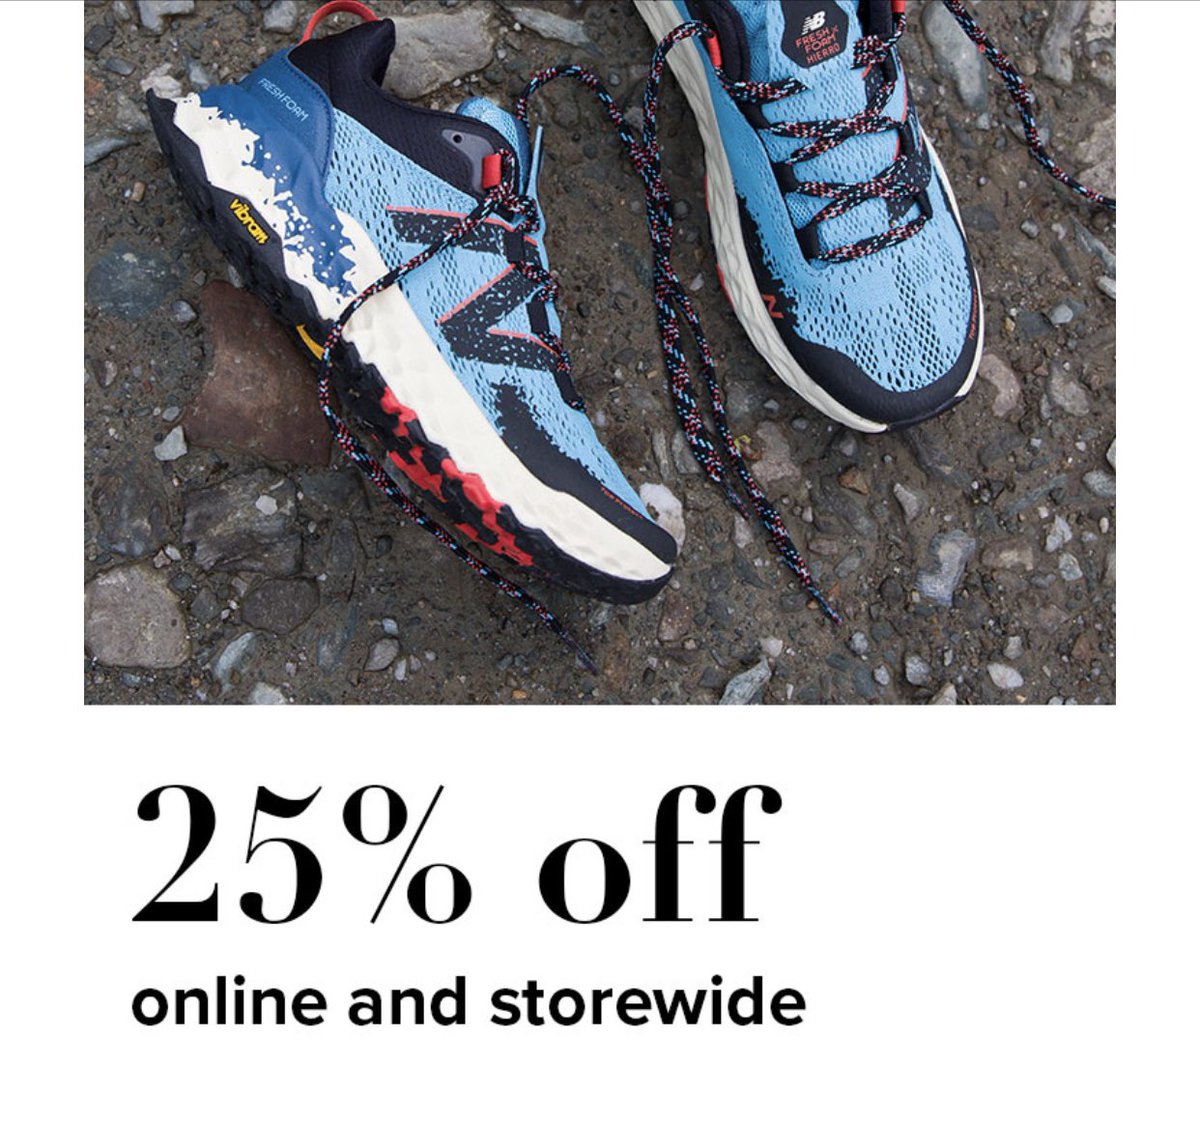 new balance sale exclusions